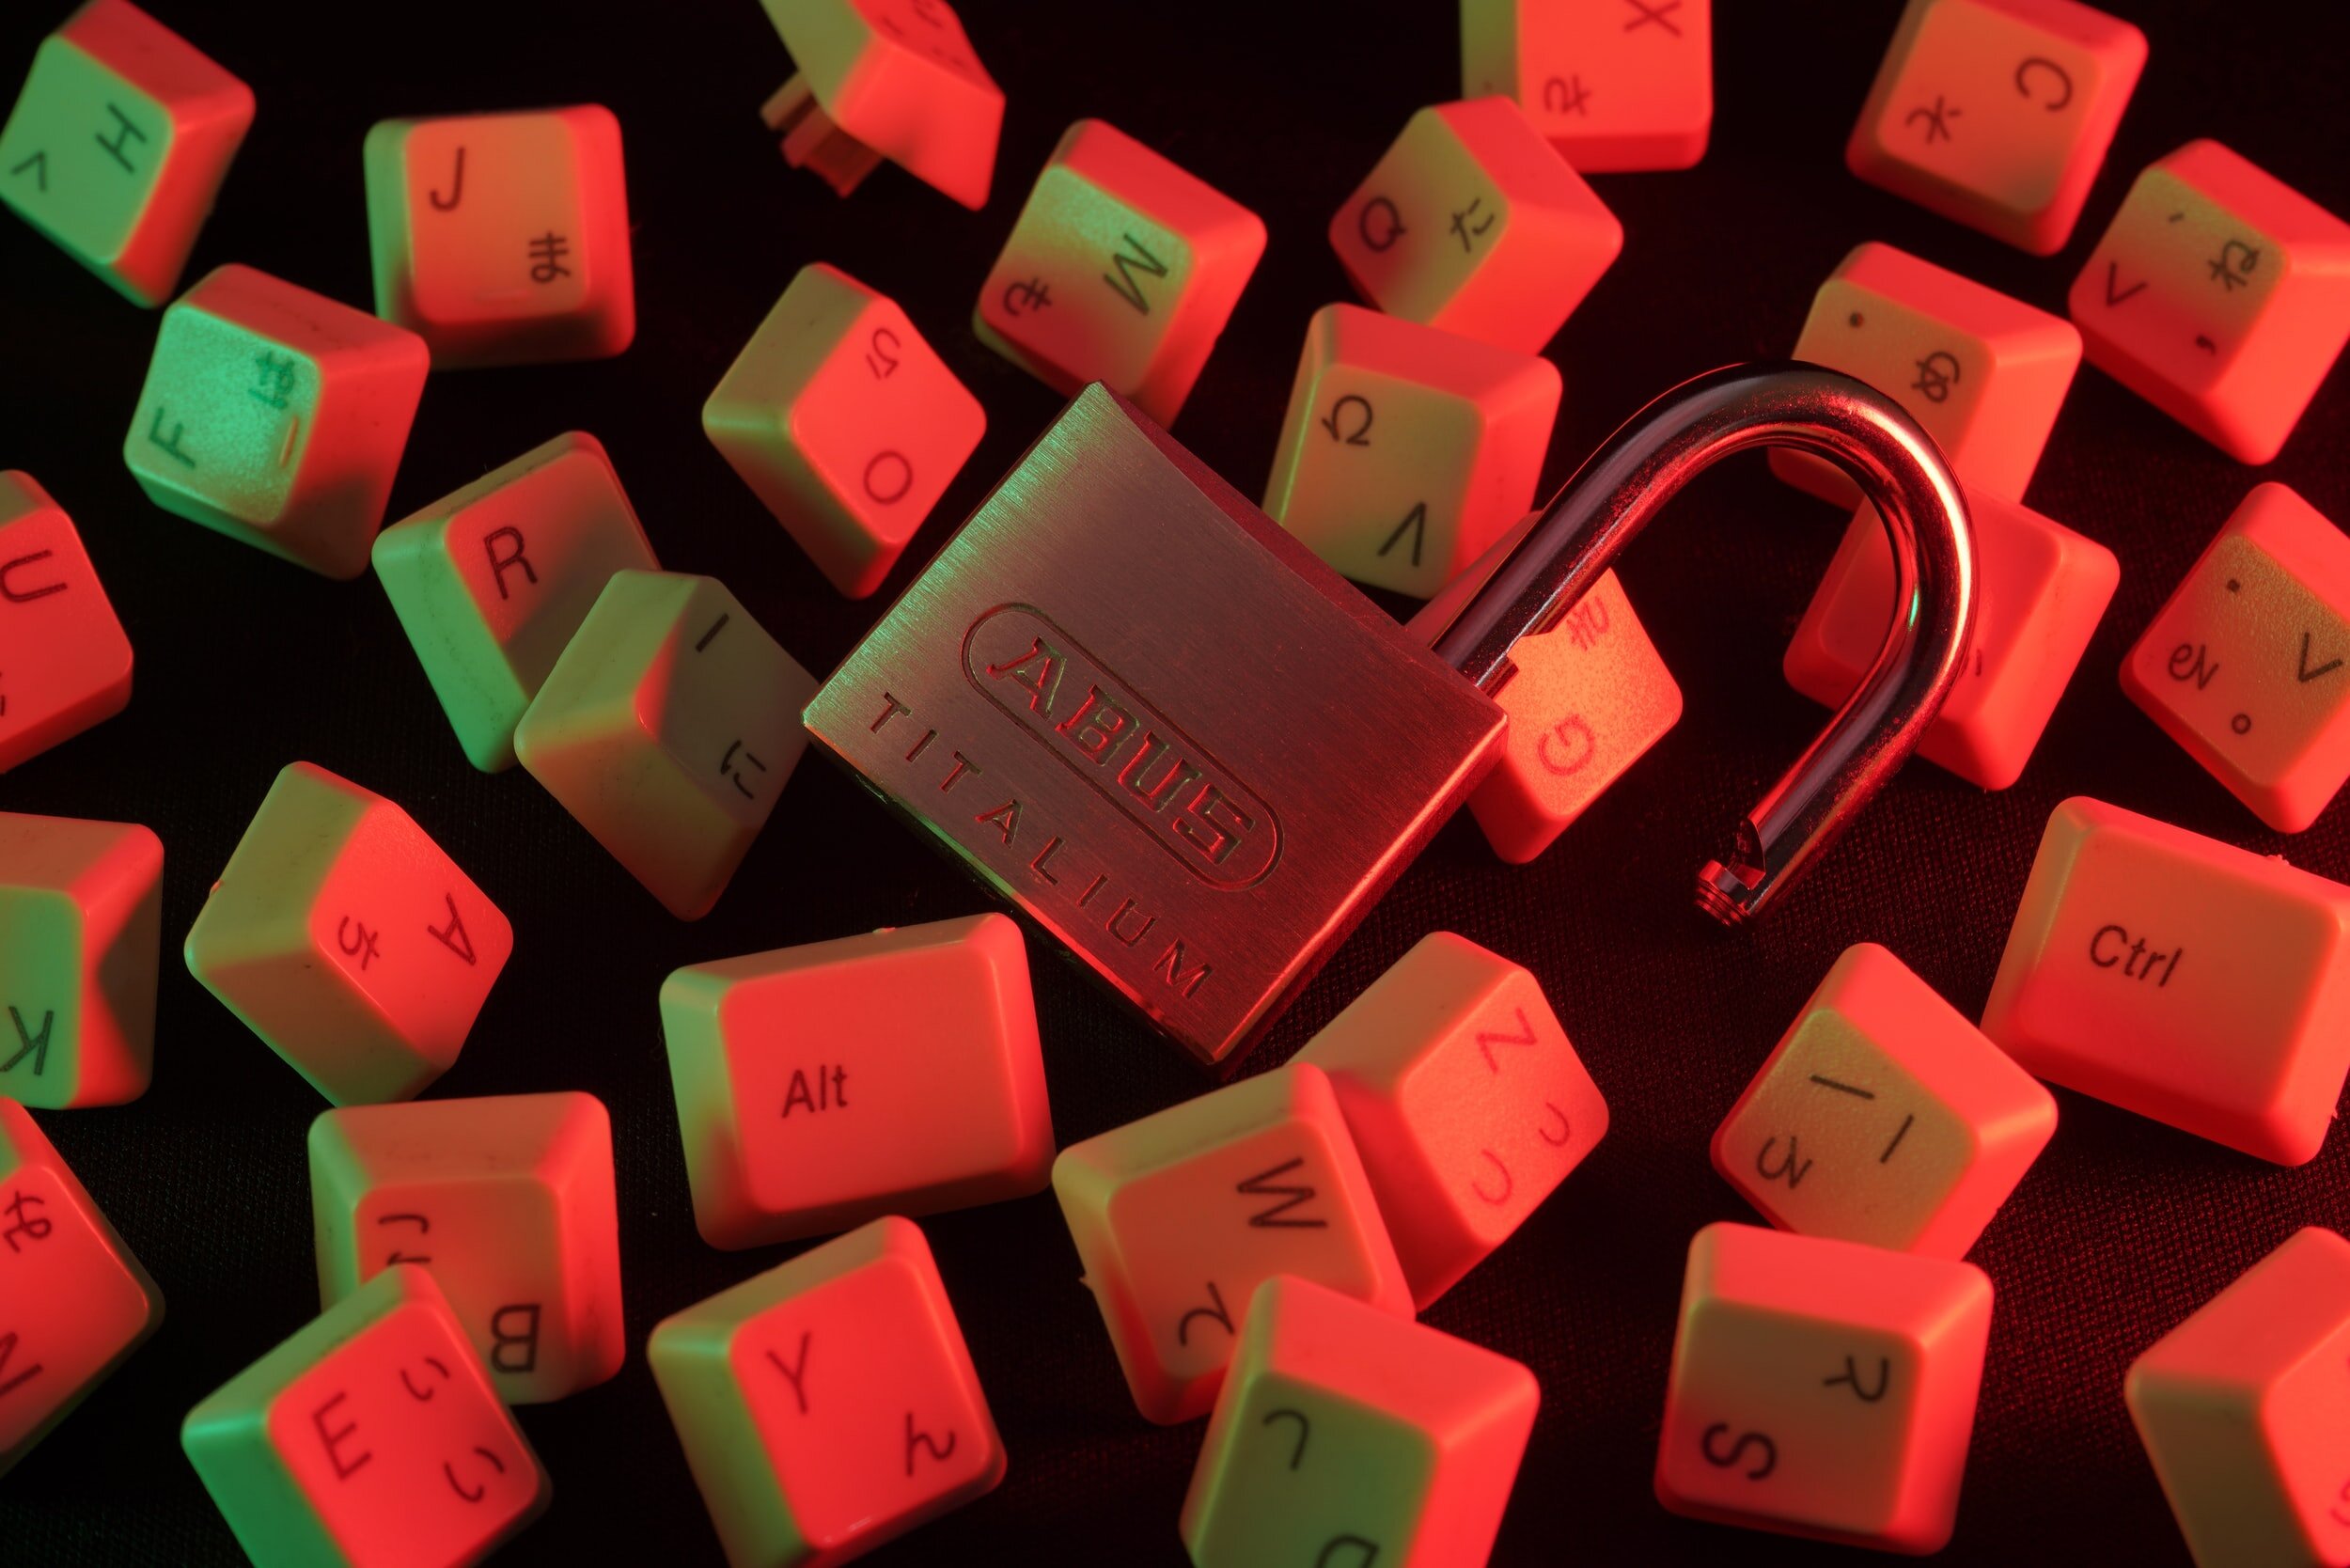 An open padlock is surrounded by keyboard keys and bathed in red light